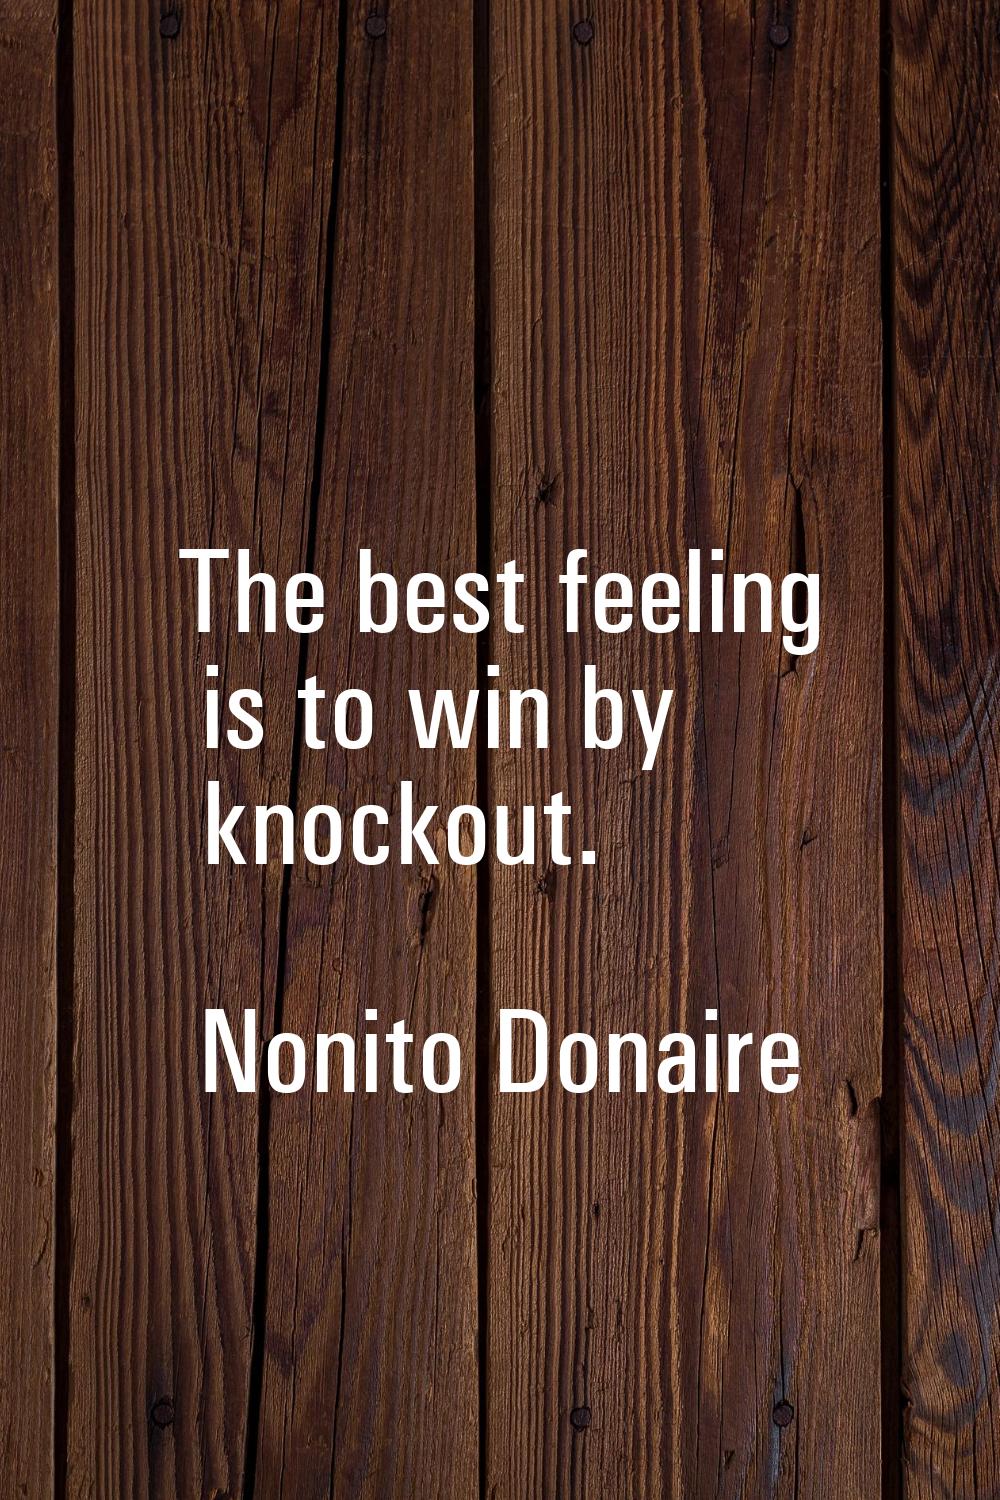 The best feeling is to win by knockout.